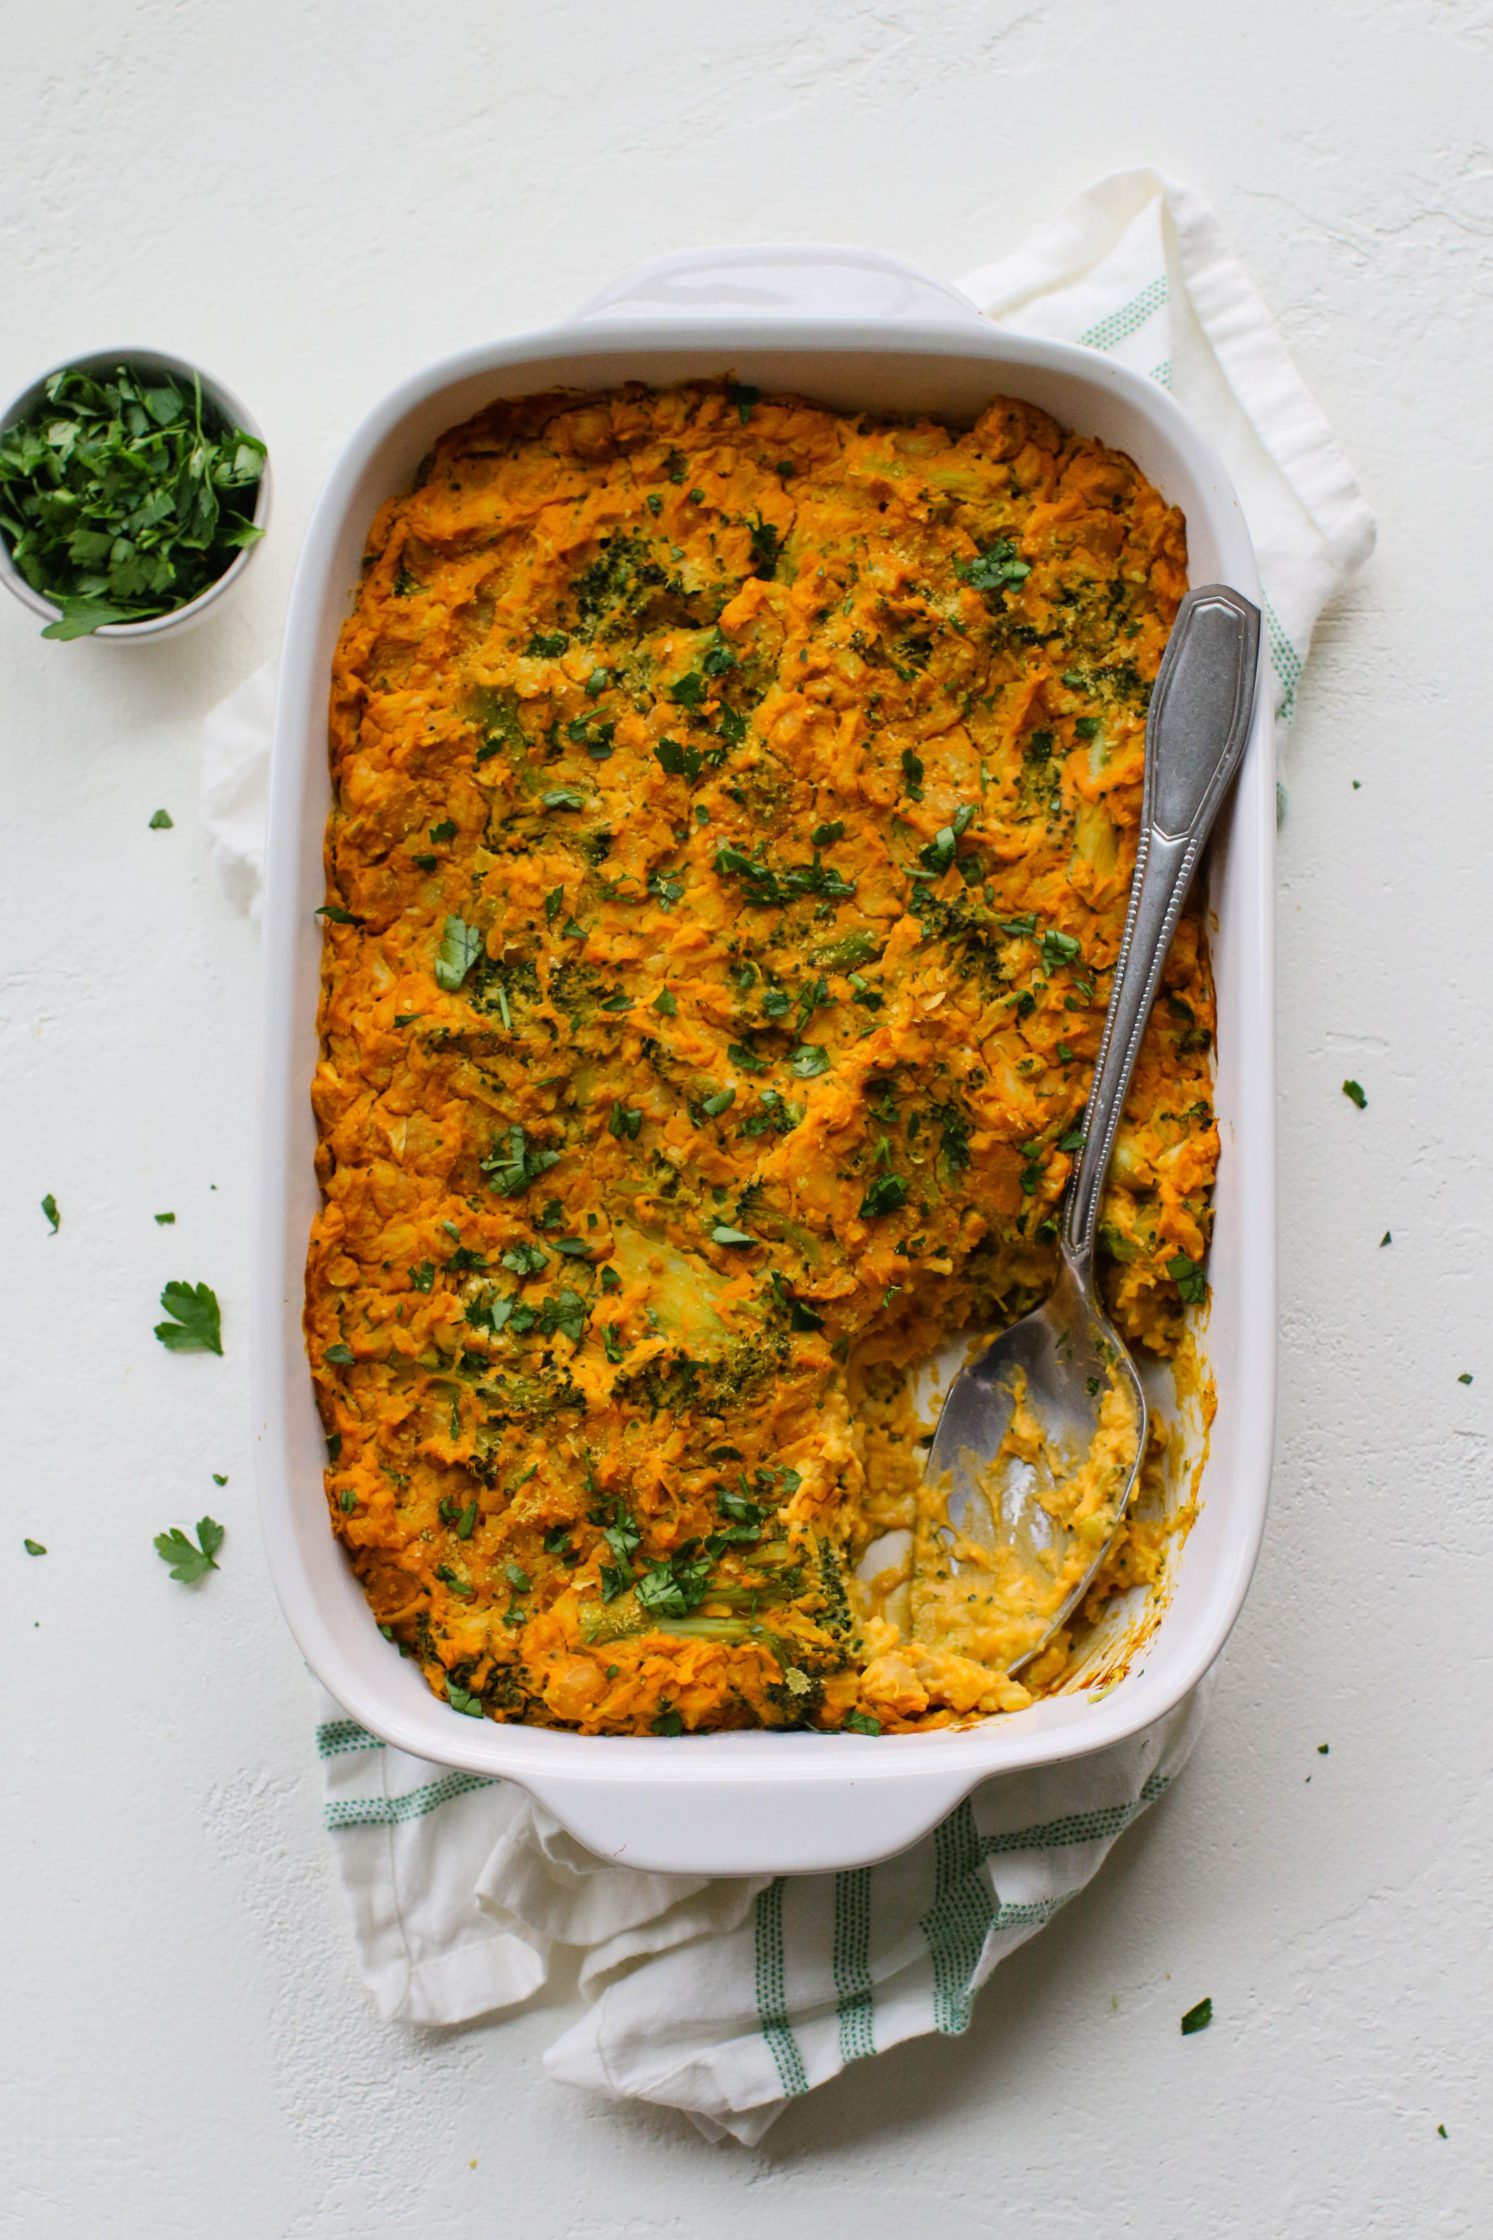 “Cheezy” Chickpea & Broccoli Casserole in casserole dish with spoon by Flora & Vino